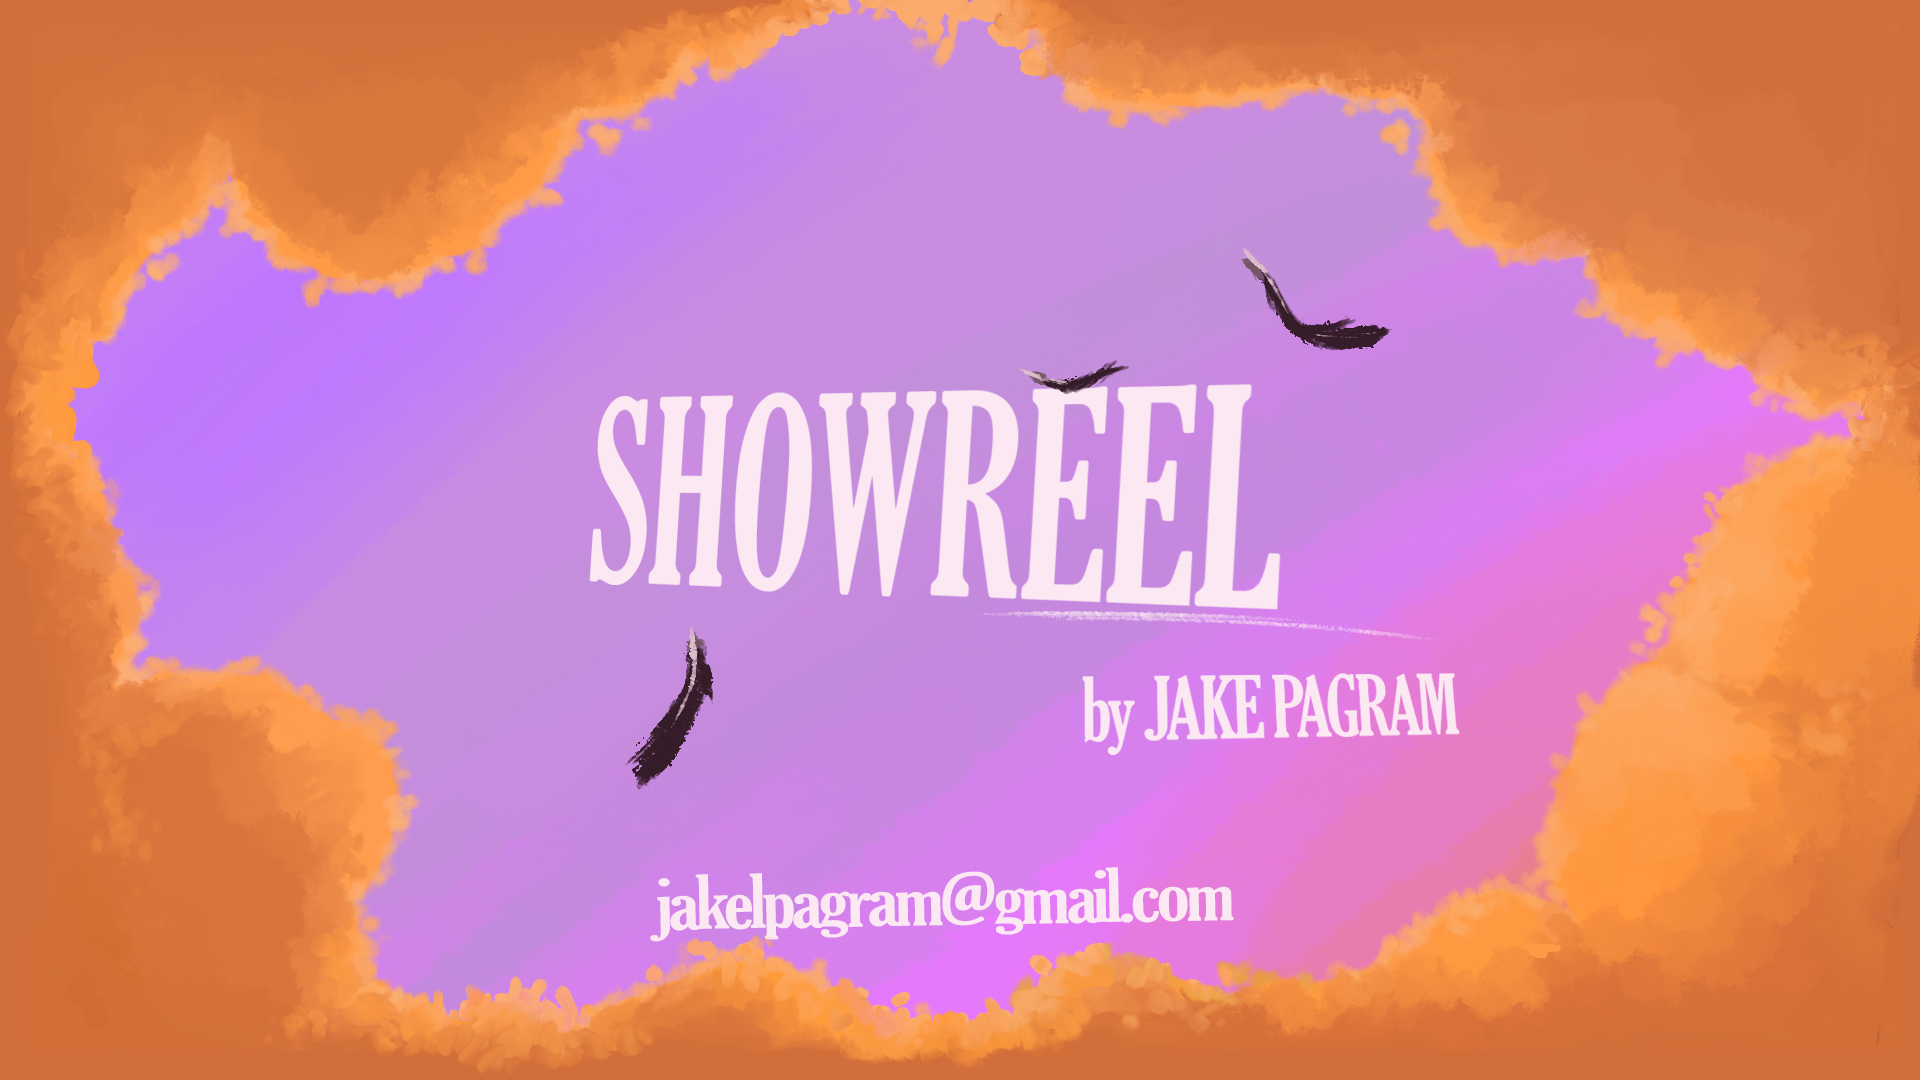 A showreel video by Jake Pagram, showing clips of their finest 2D animated work.